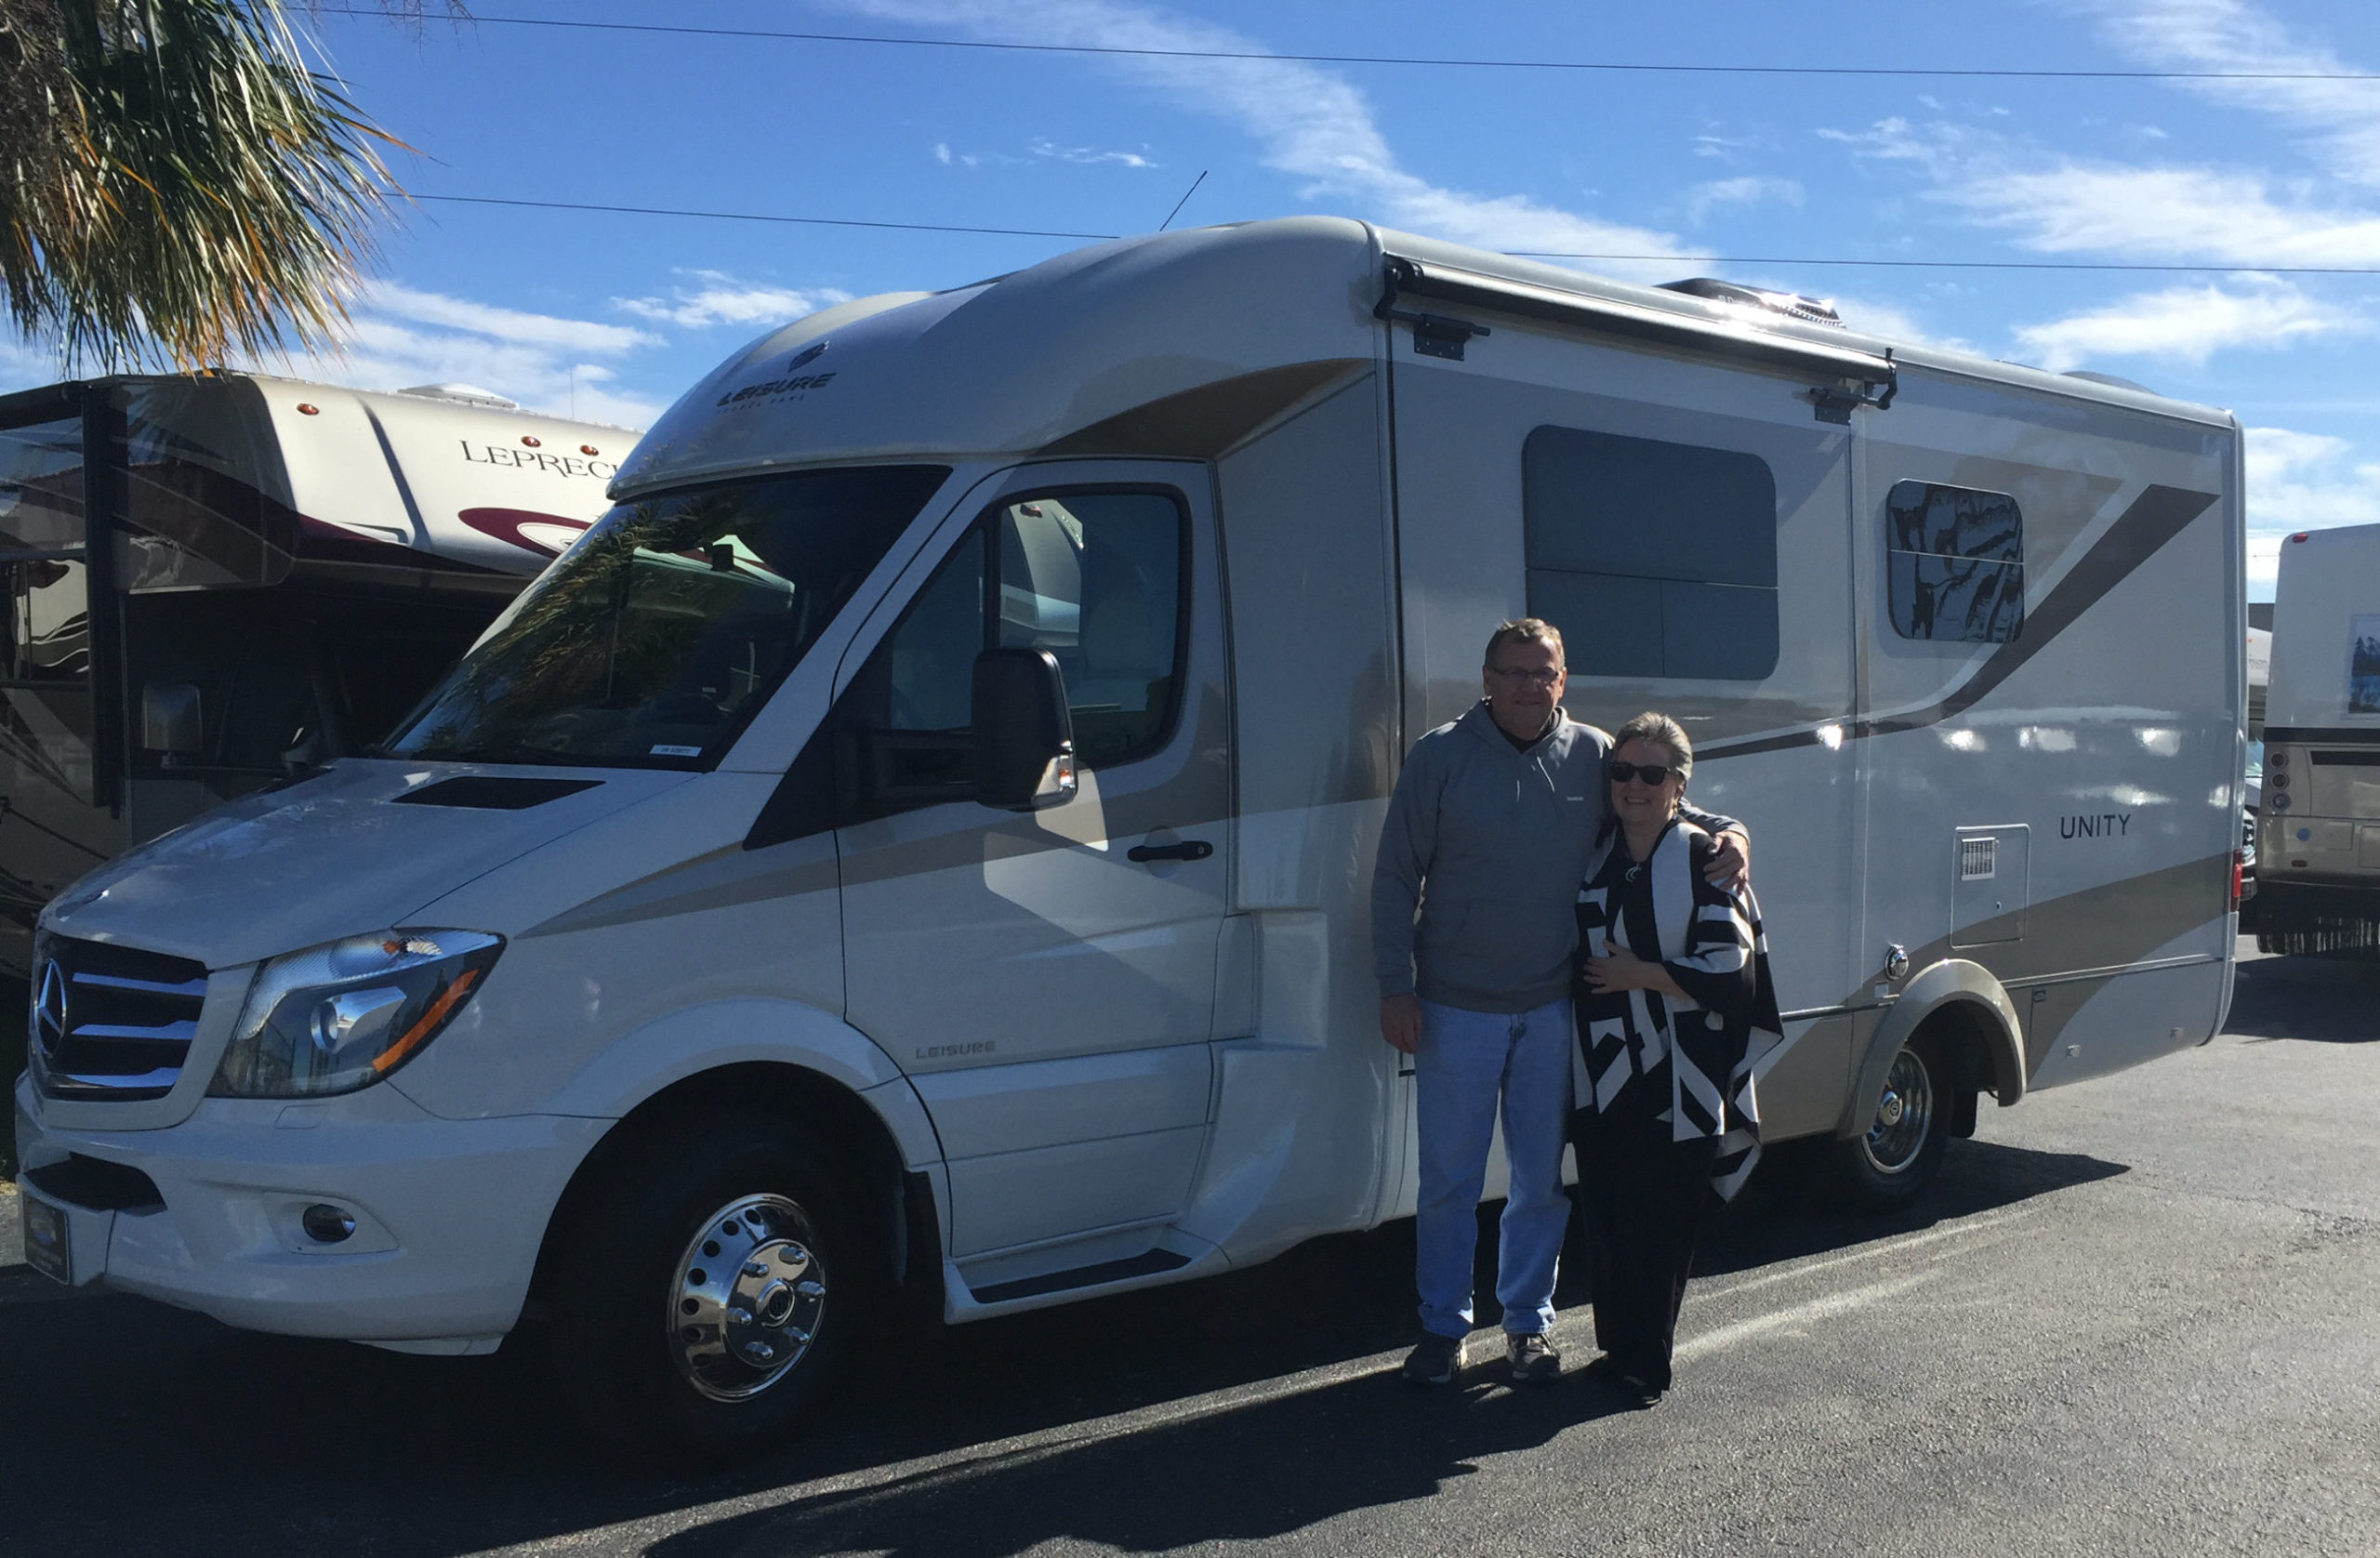 Couple standing in front of RV